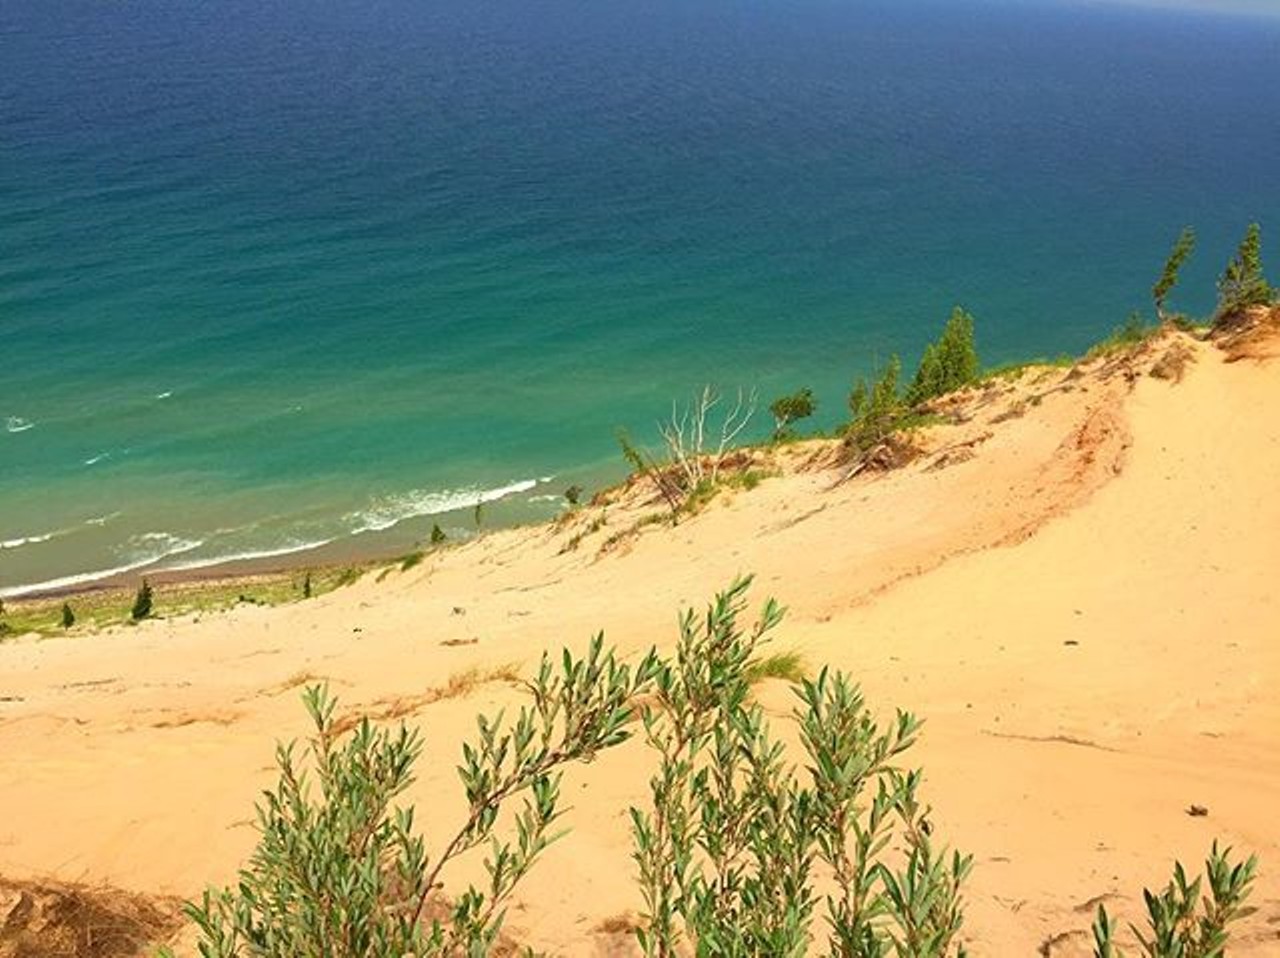 Arcadia Dunes, Arcadia, Michigan
Arcadia Dunes double as part of the Sleeping Bear Dunes birding section. With 15 miles of trail to explore the dunes and neighboring forests to explore, Arcadia provides a stellar place for mountain biking and hiking.(Photo via Instagram, @lisazook)